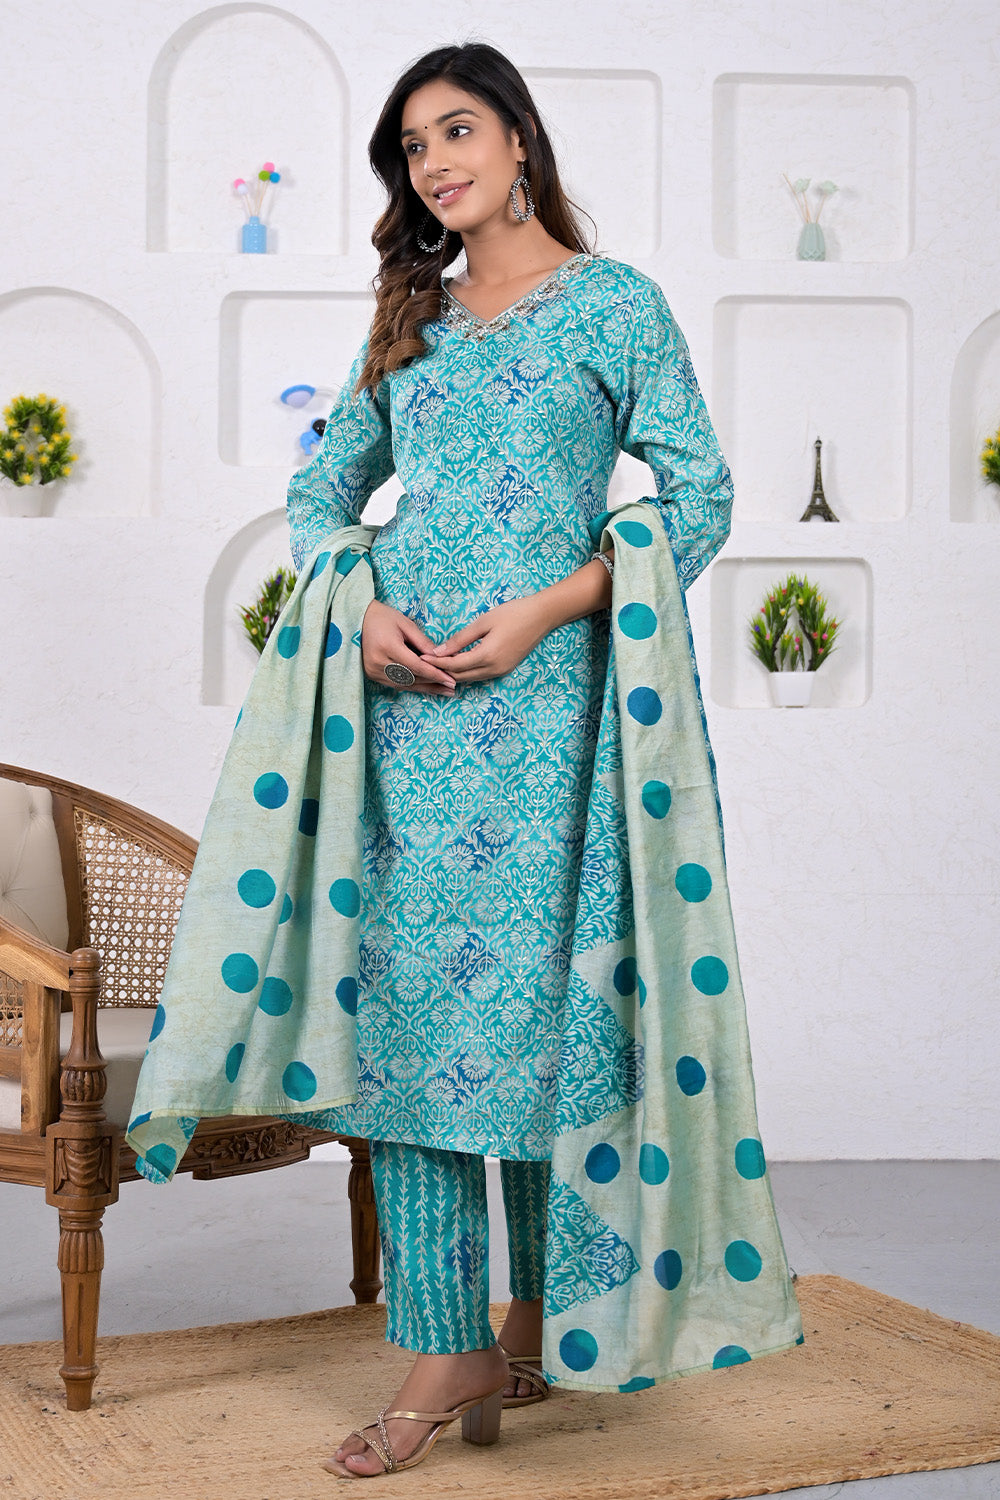 Turquoise Color Muslin Neck Embroidered Suit